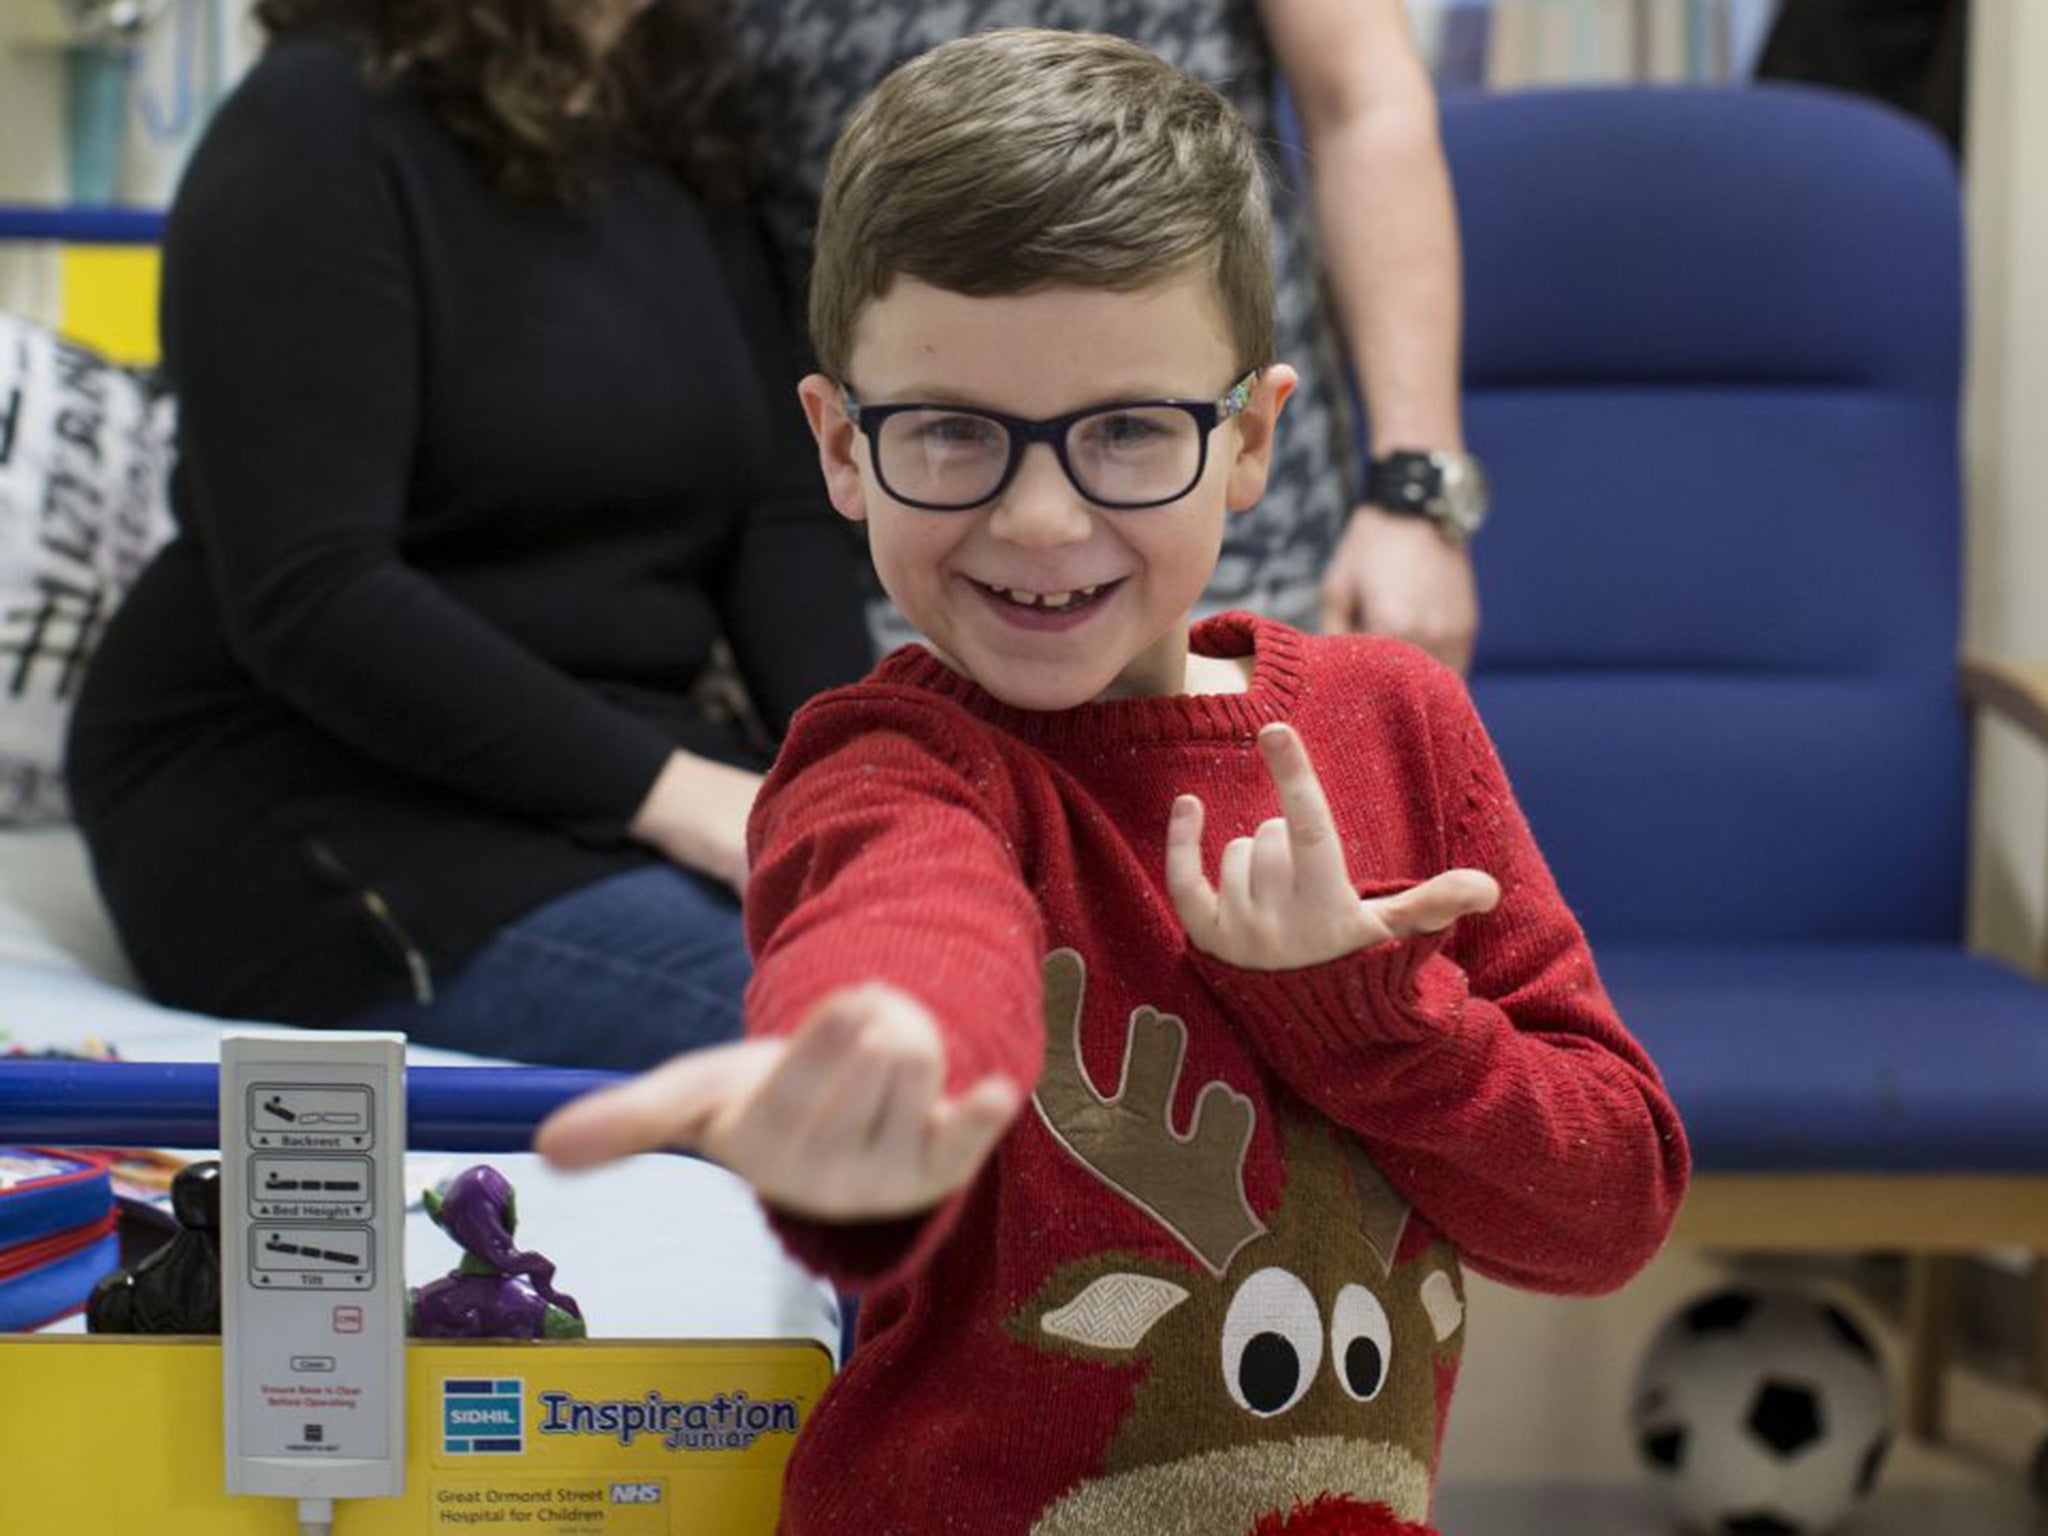 Taylor Banks, 7, has been an inpatient at GOSH since October